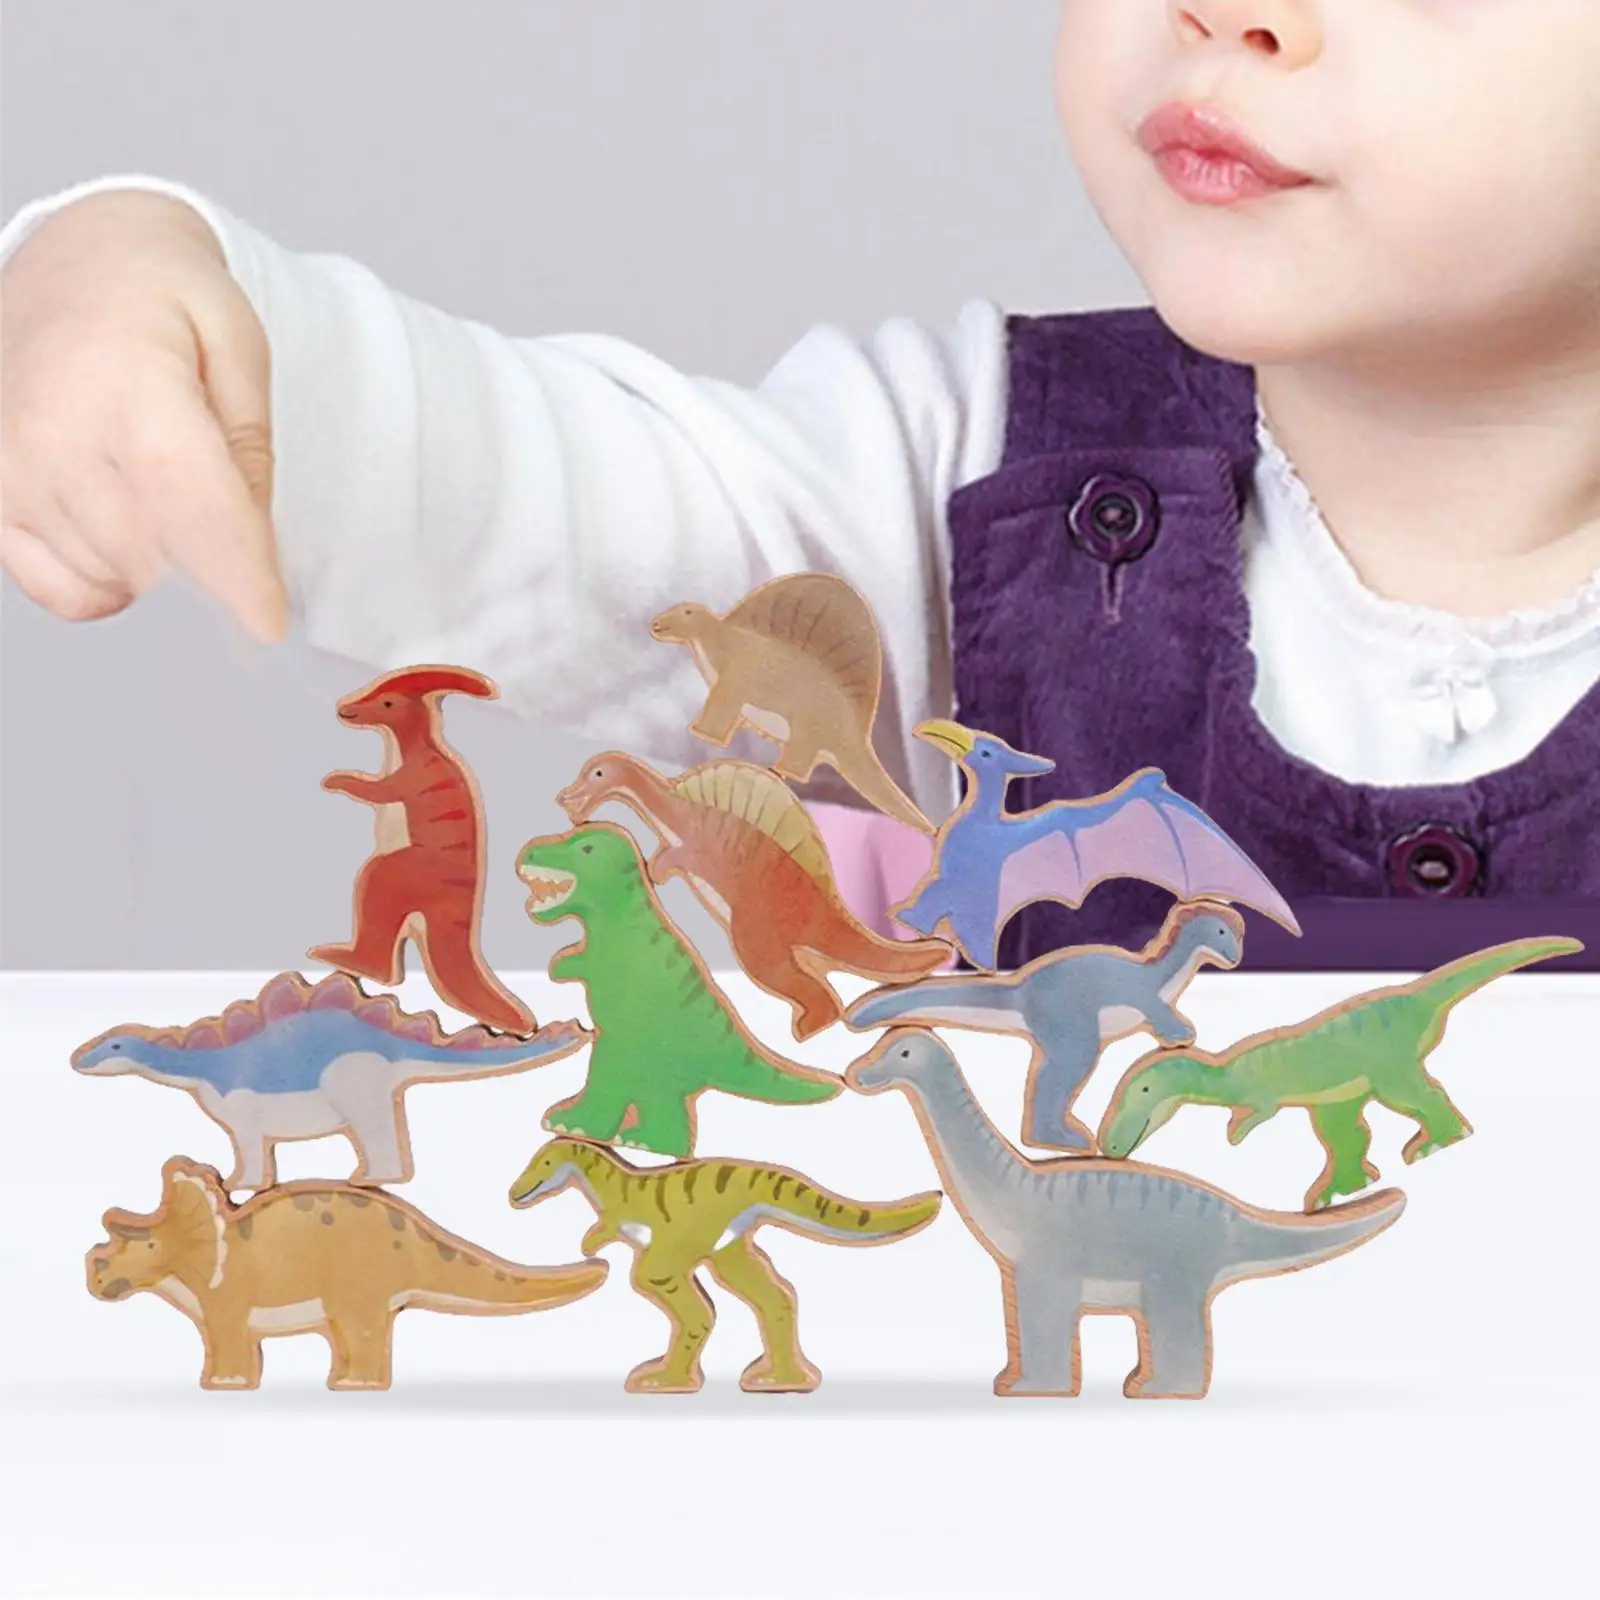 Montessori Wood Dinosaurs Balance Game Learning Building Toys Puzzle Toys Funny for Girls Boys Toddler Children Birthday Gifts